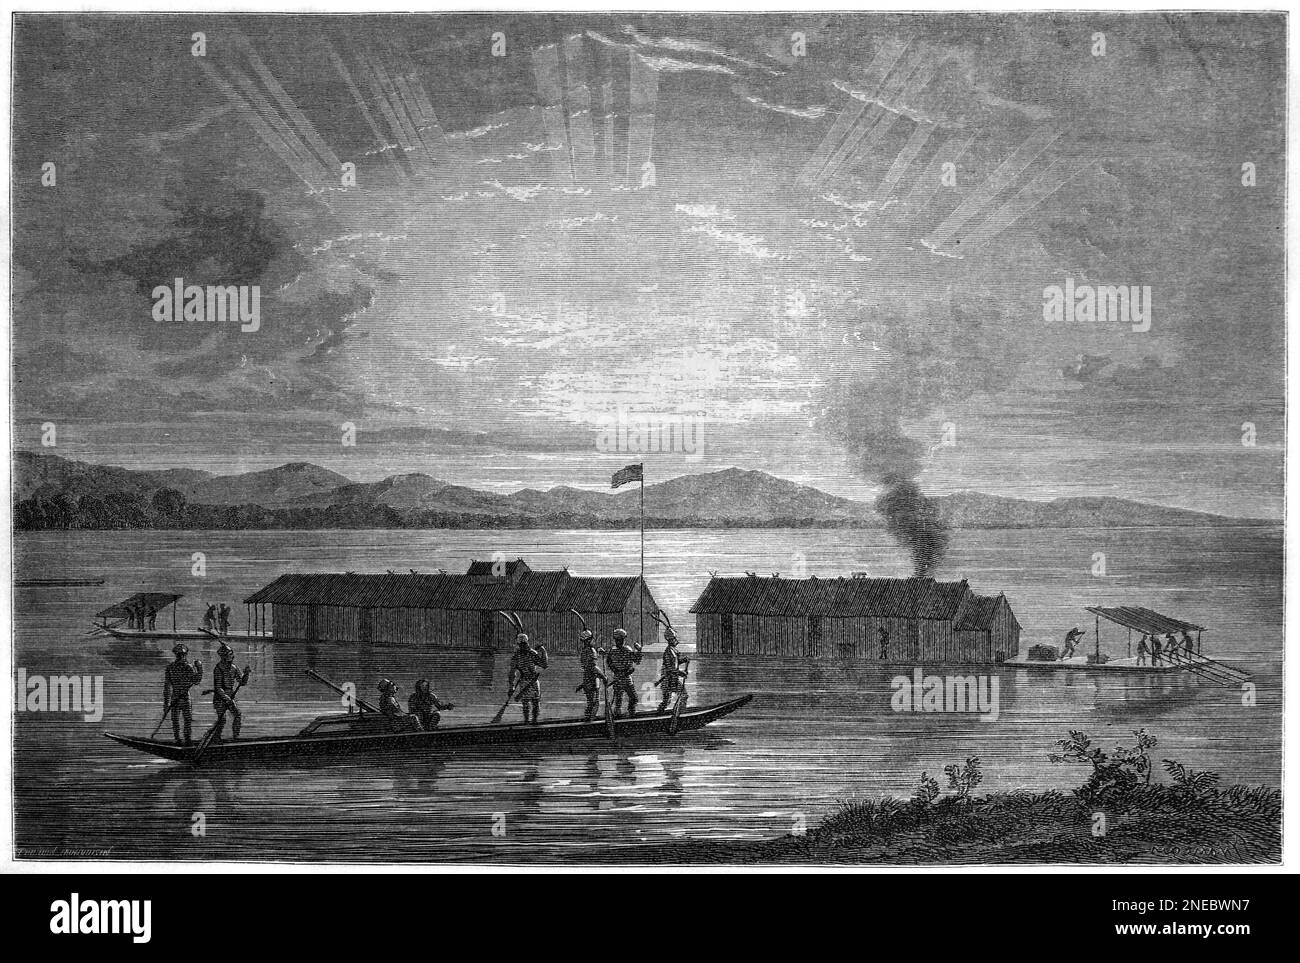 Floating Houses or River Dayak on River Barito Borneo South Kalimantan Indonesia. Vintage Engraving or Illustration 1862 Stock Photo